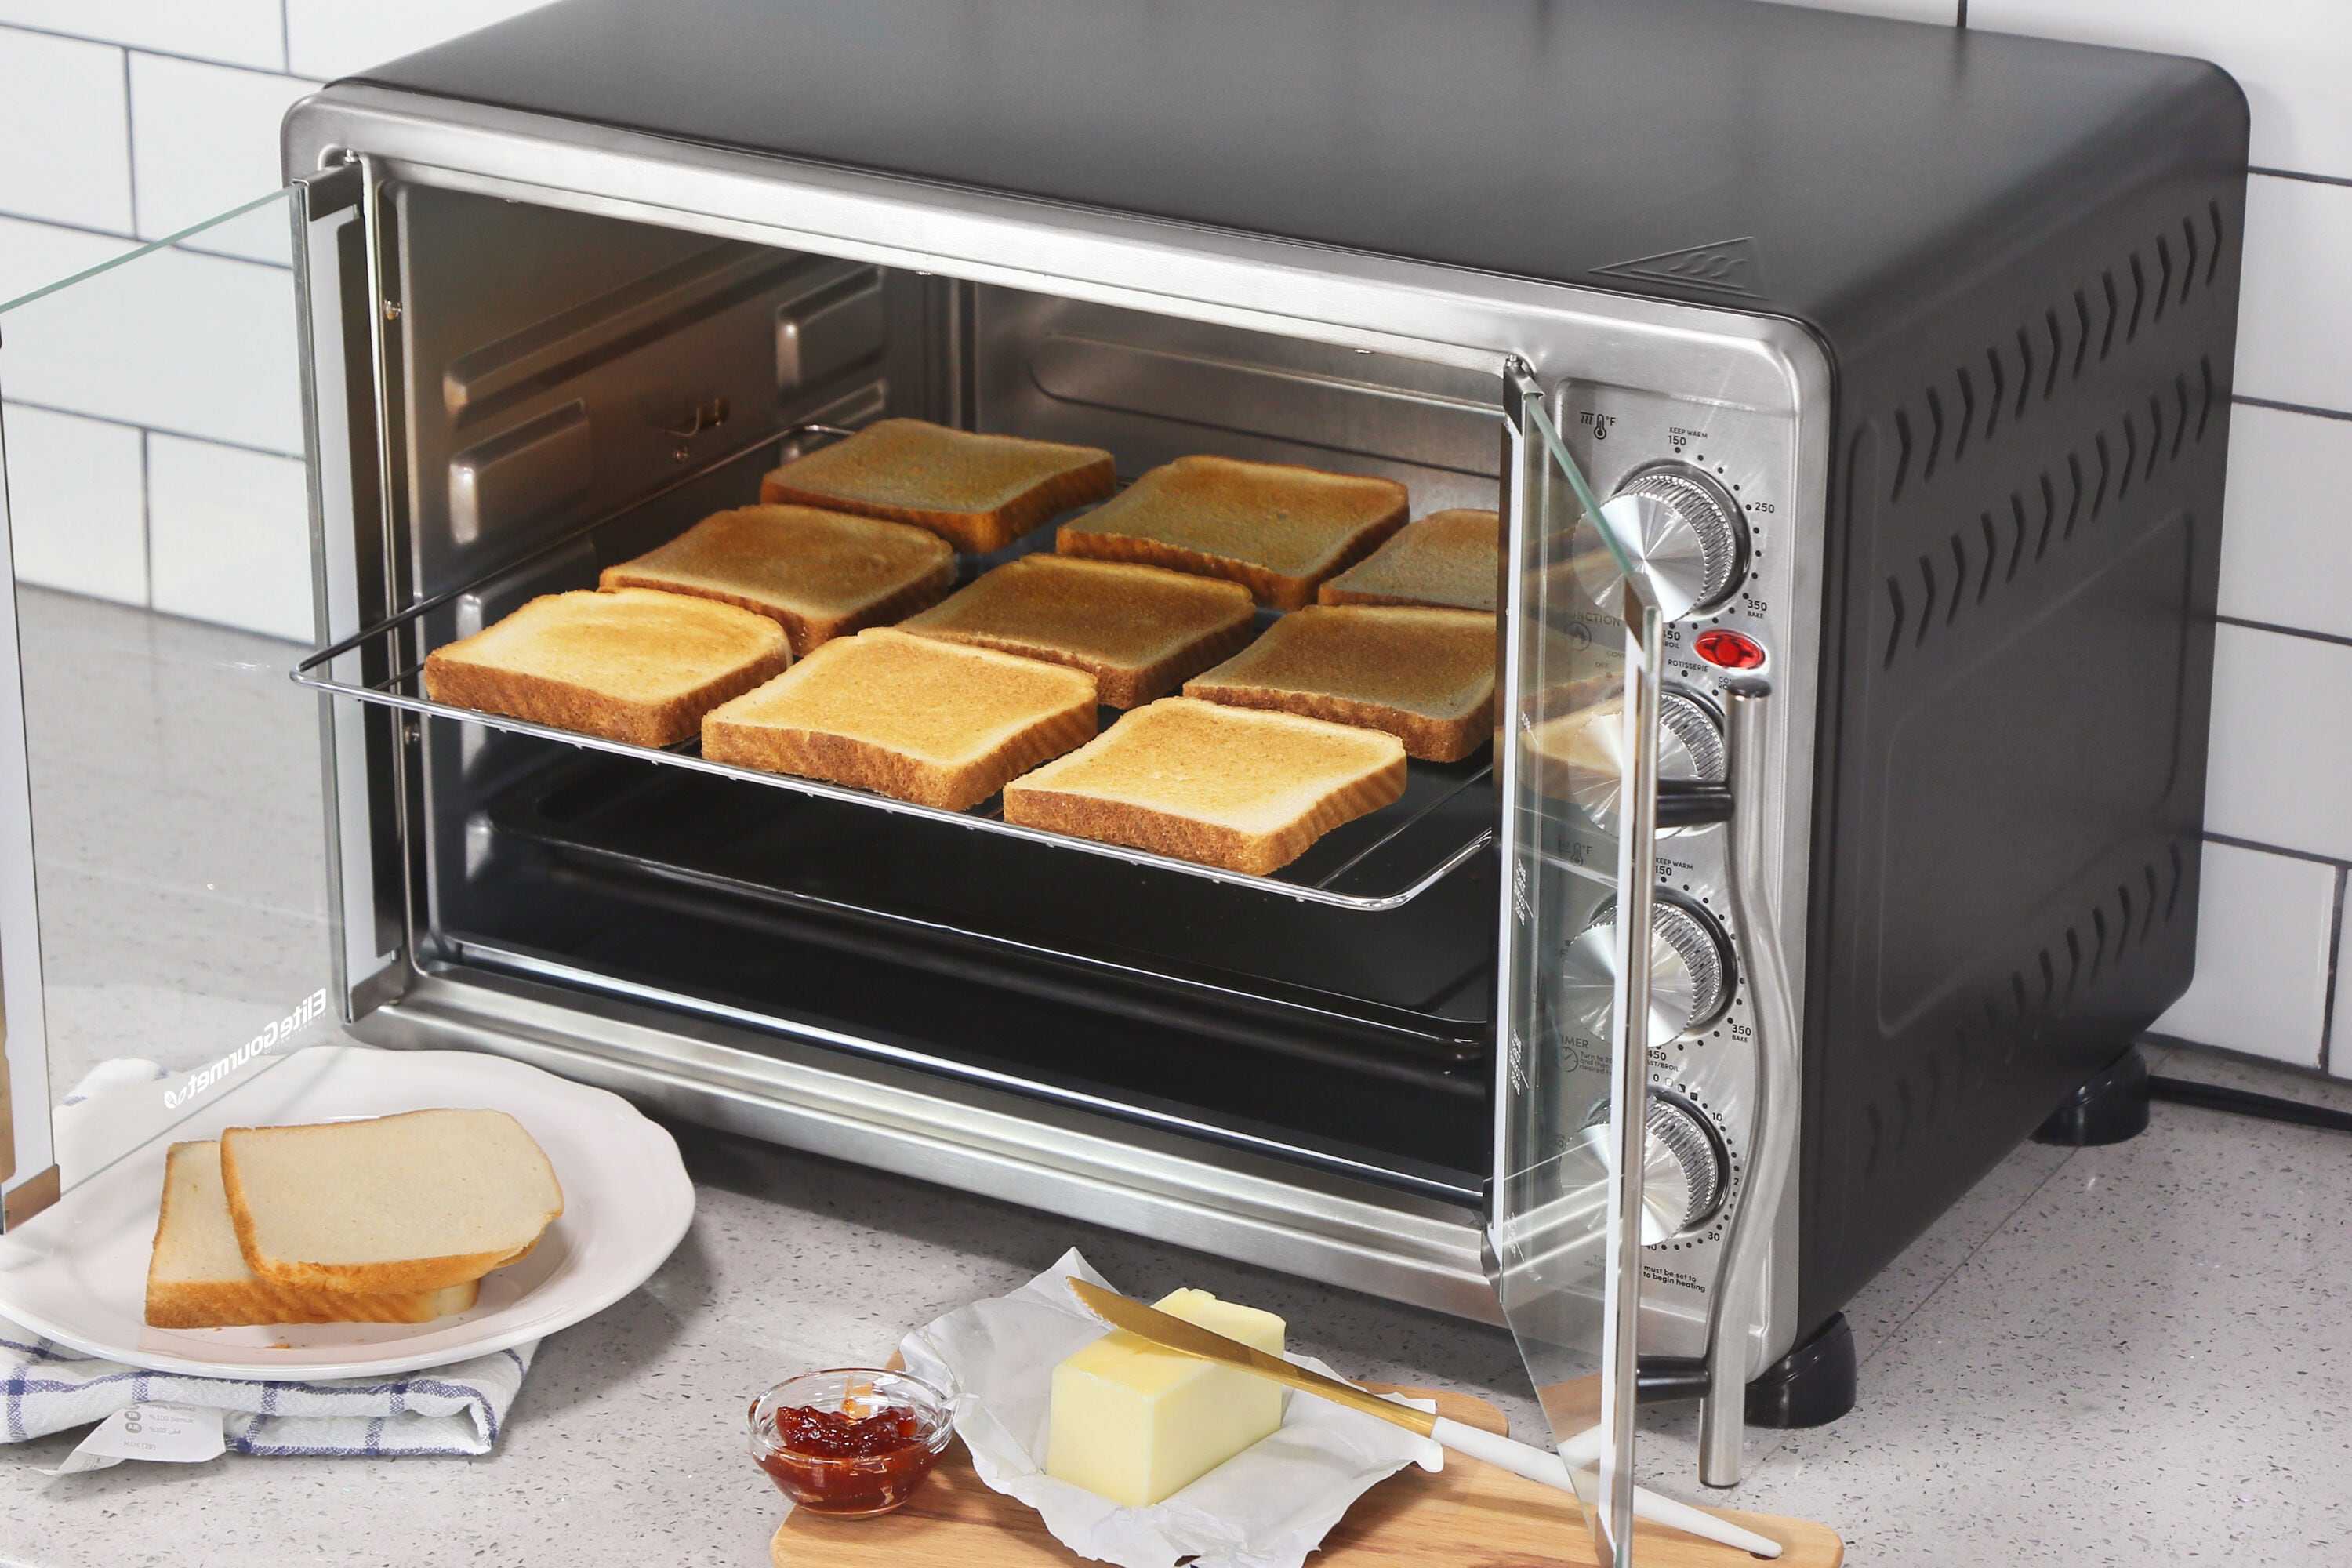 Elite 14-Slice Silver Convection Toaster Oven with Rotisserie